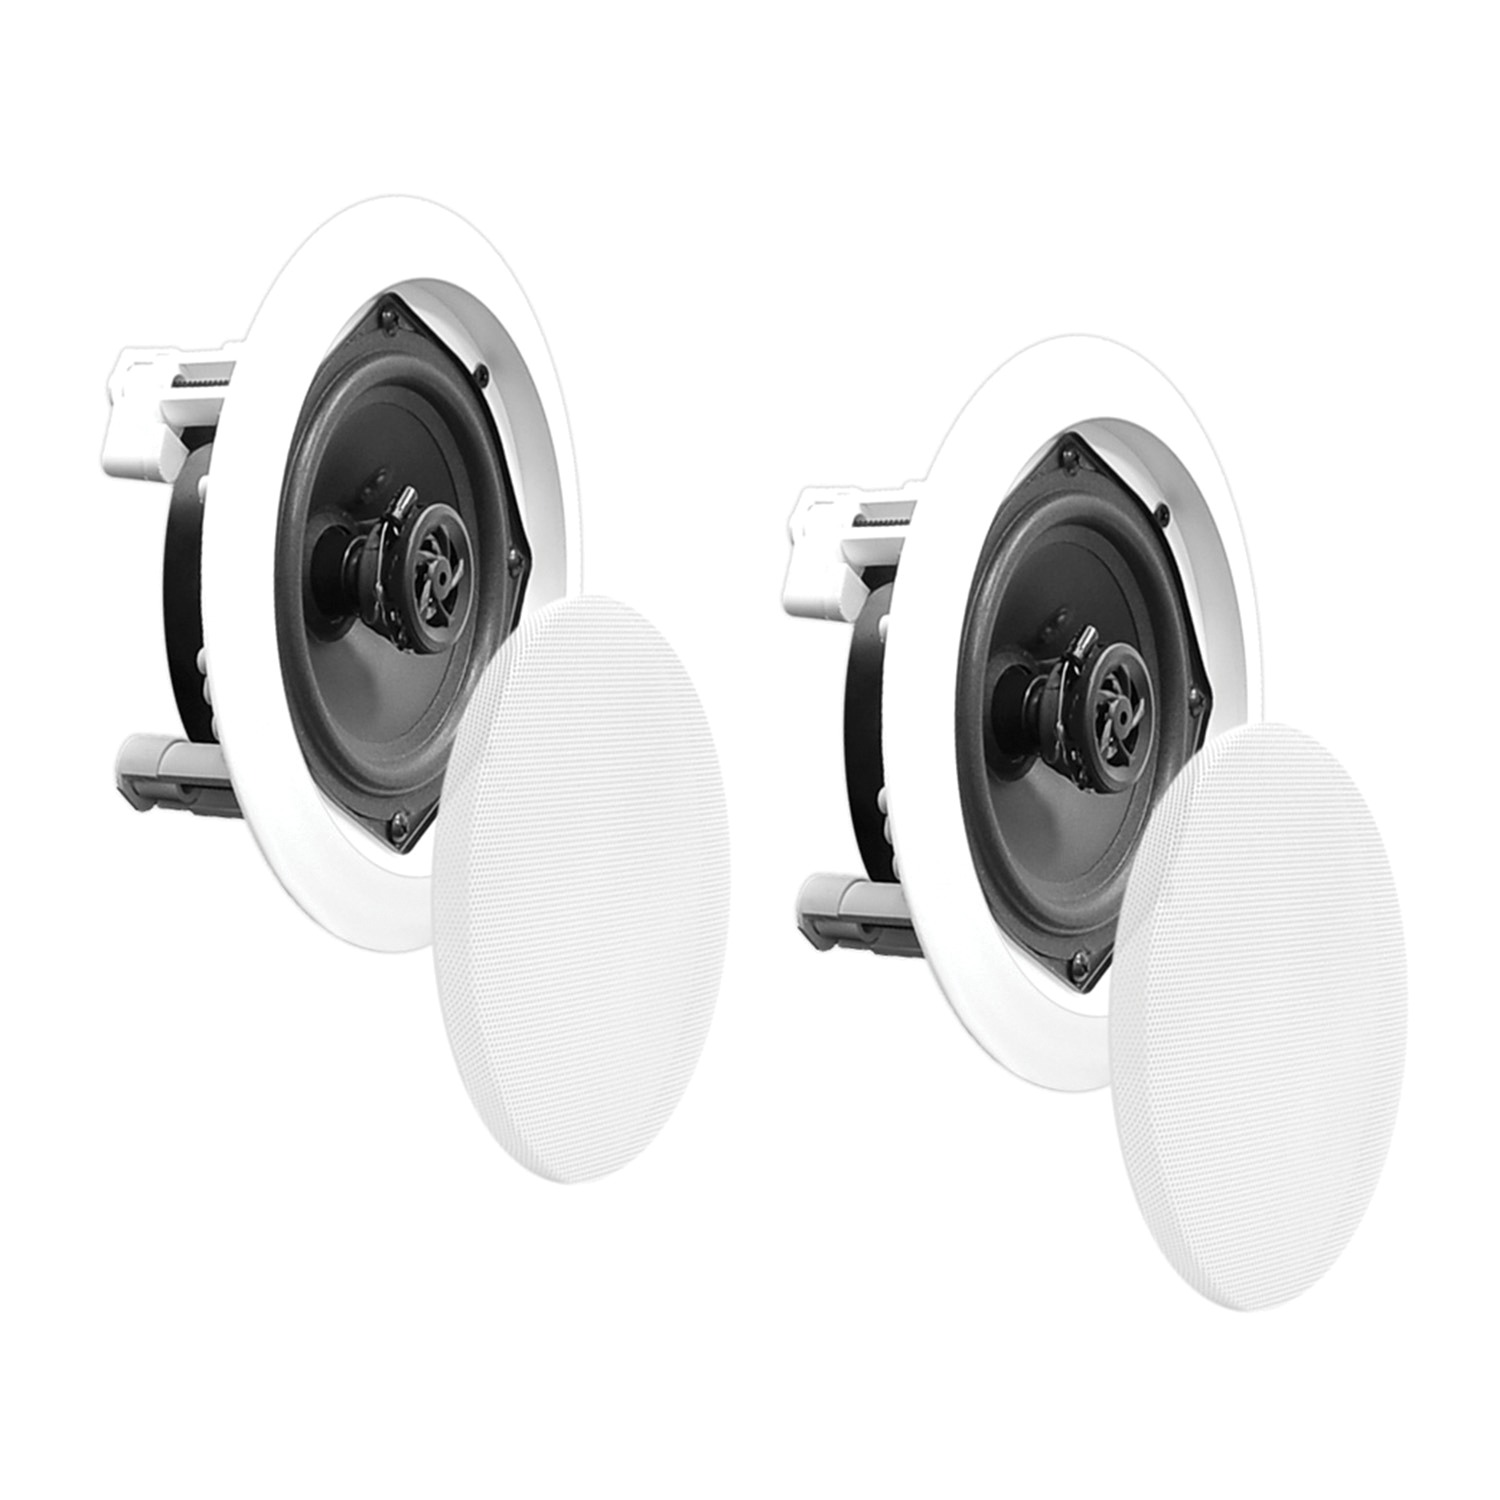 Pyle® In-wall/in-ceiling 5-1/4 Inch 2-way Speakers - image 3 of 5